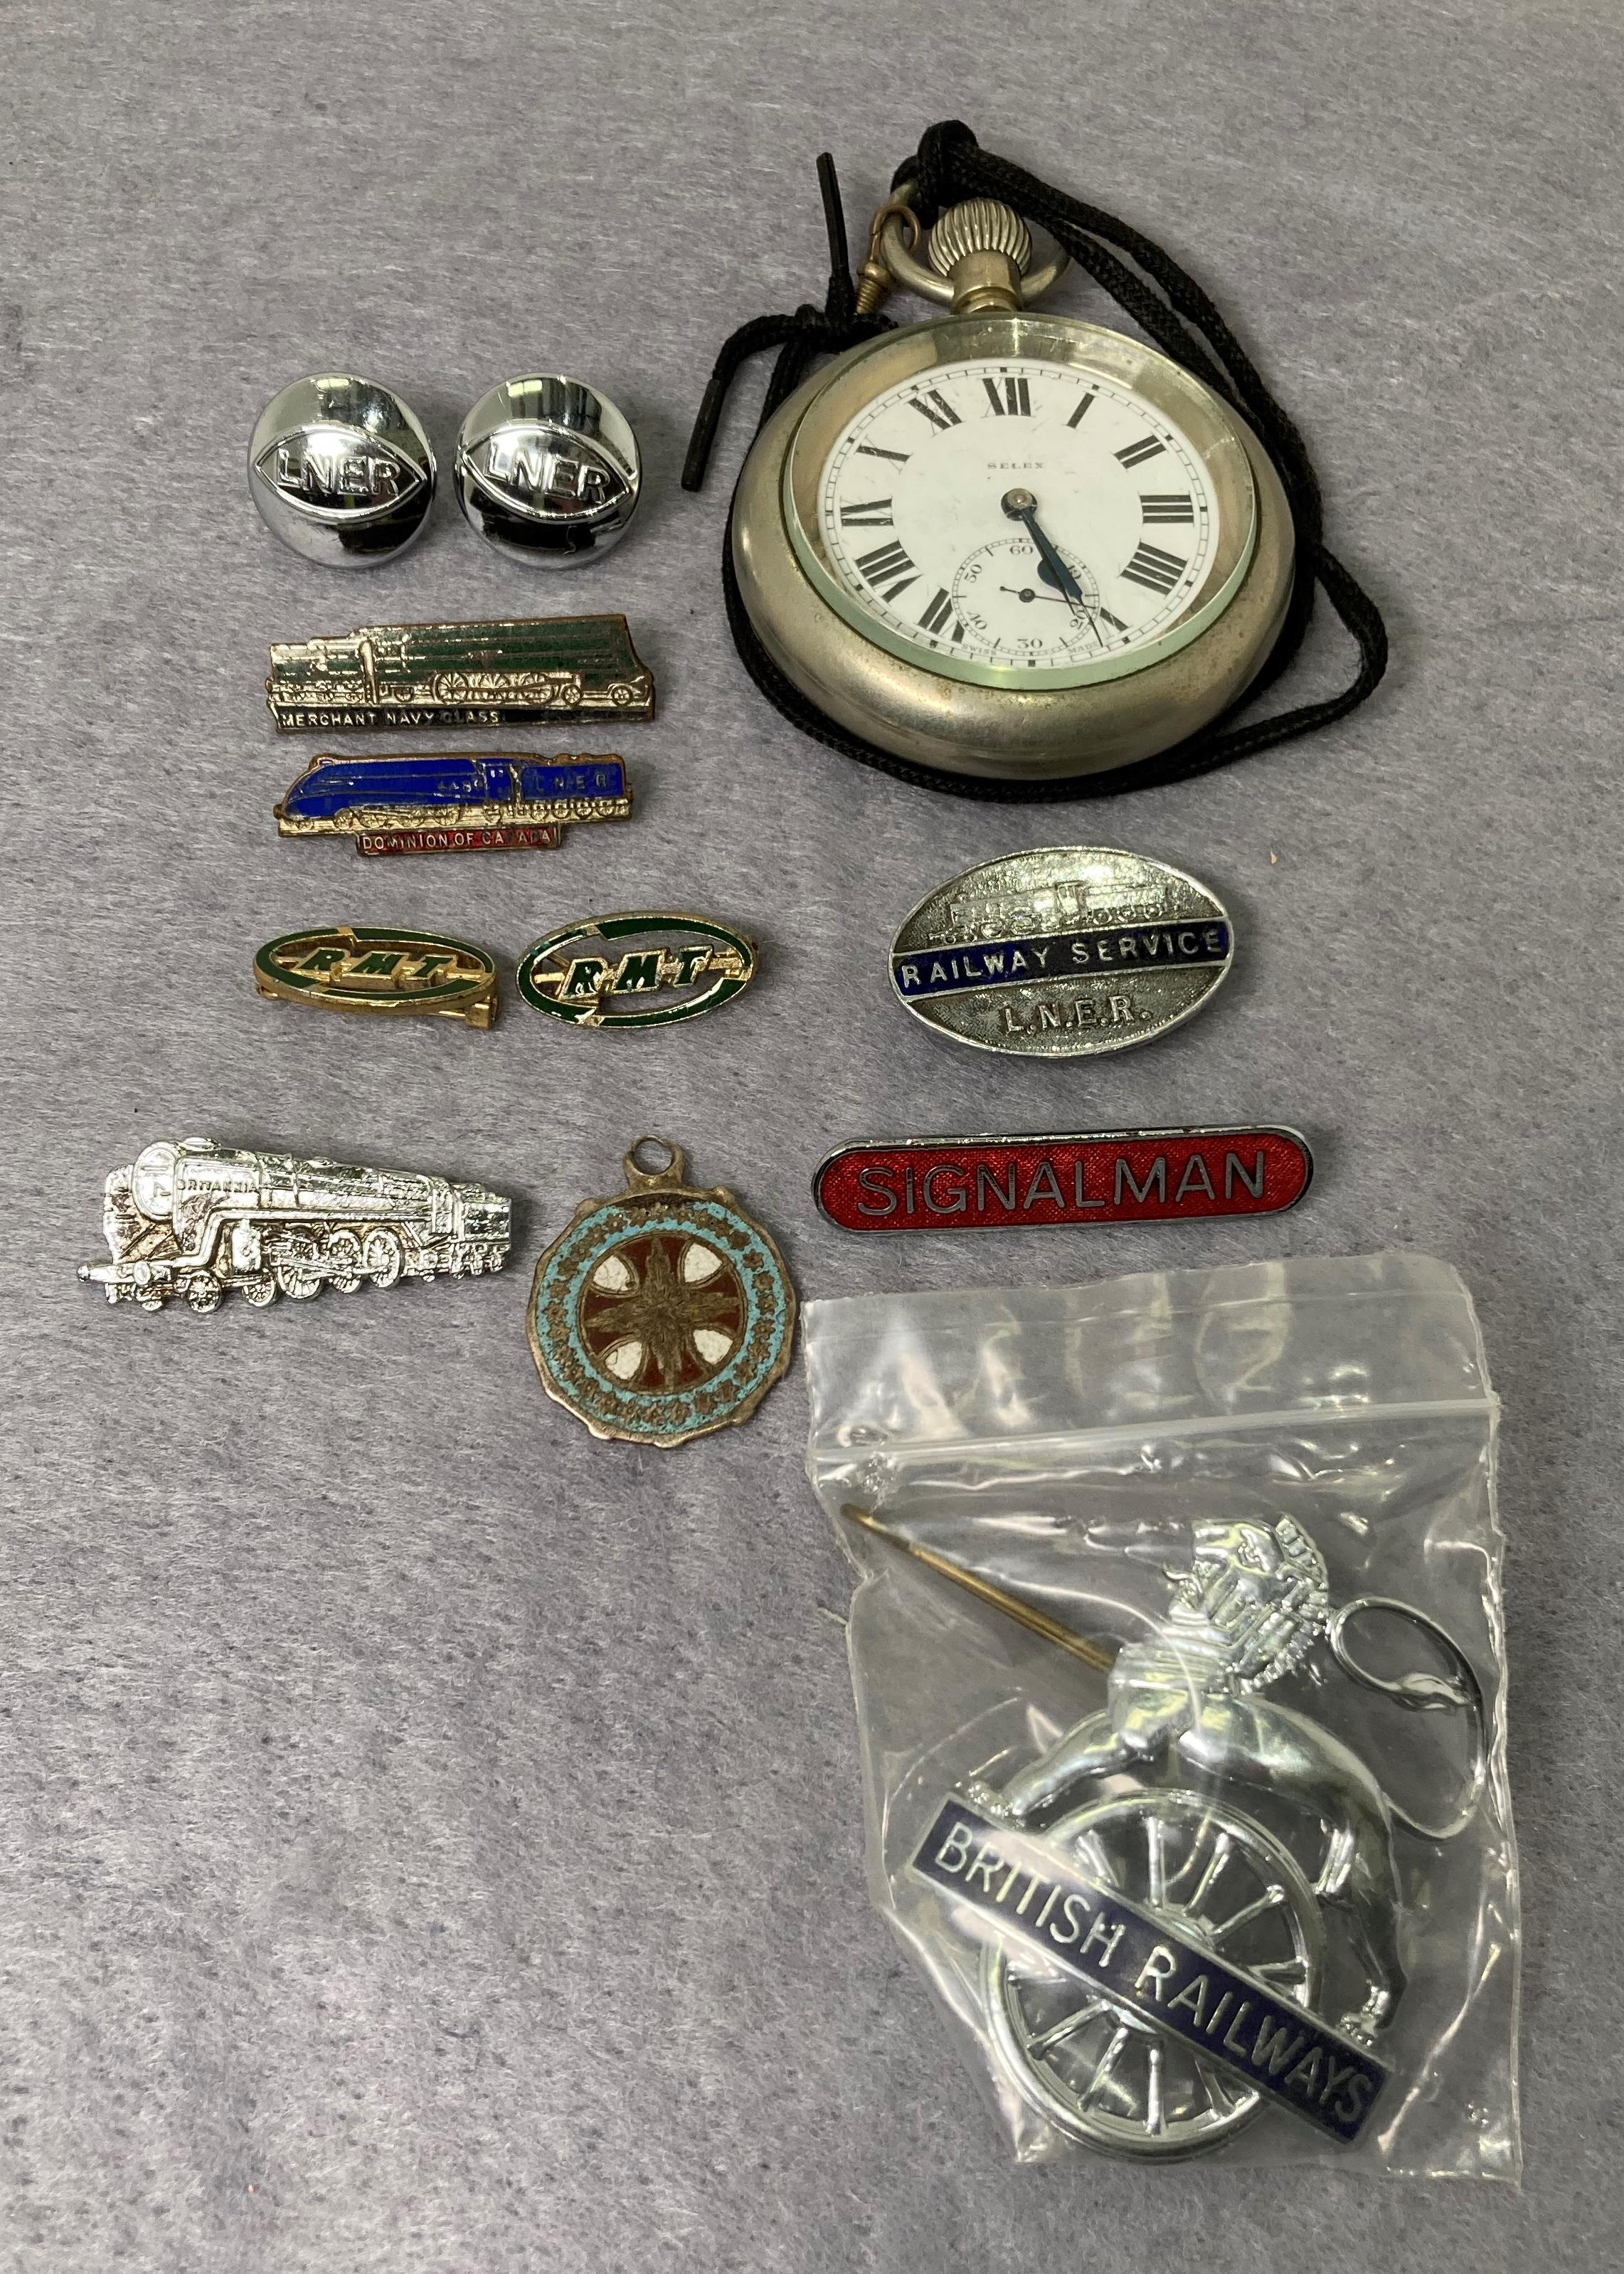 Selex pocket watch (working) with "LNER 9176 Relief" engraved to back, railway badges, cap badge,